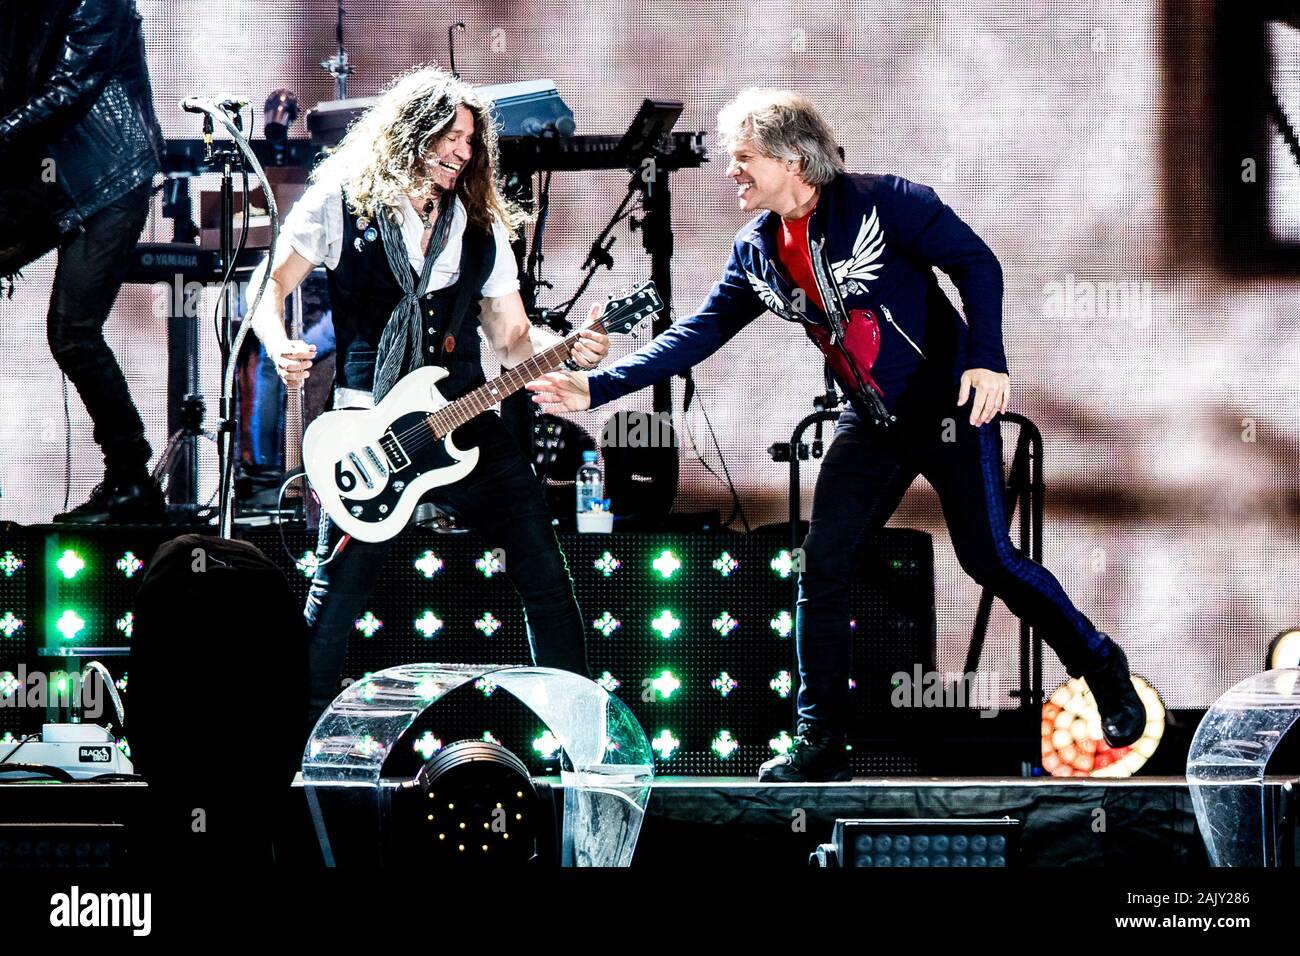 Soenderborg, Denmark. 11th, June 2019. The American rock band Bon Jovi performs a live concert at Slagmarken in Soenderborg. Here singer and musician Jon Bon Jovi is seen live on stage with guitarist Phil X. (Photo credit: Gonzales Photo - Lasse Lagoni). Stock Photo